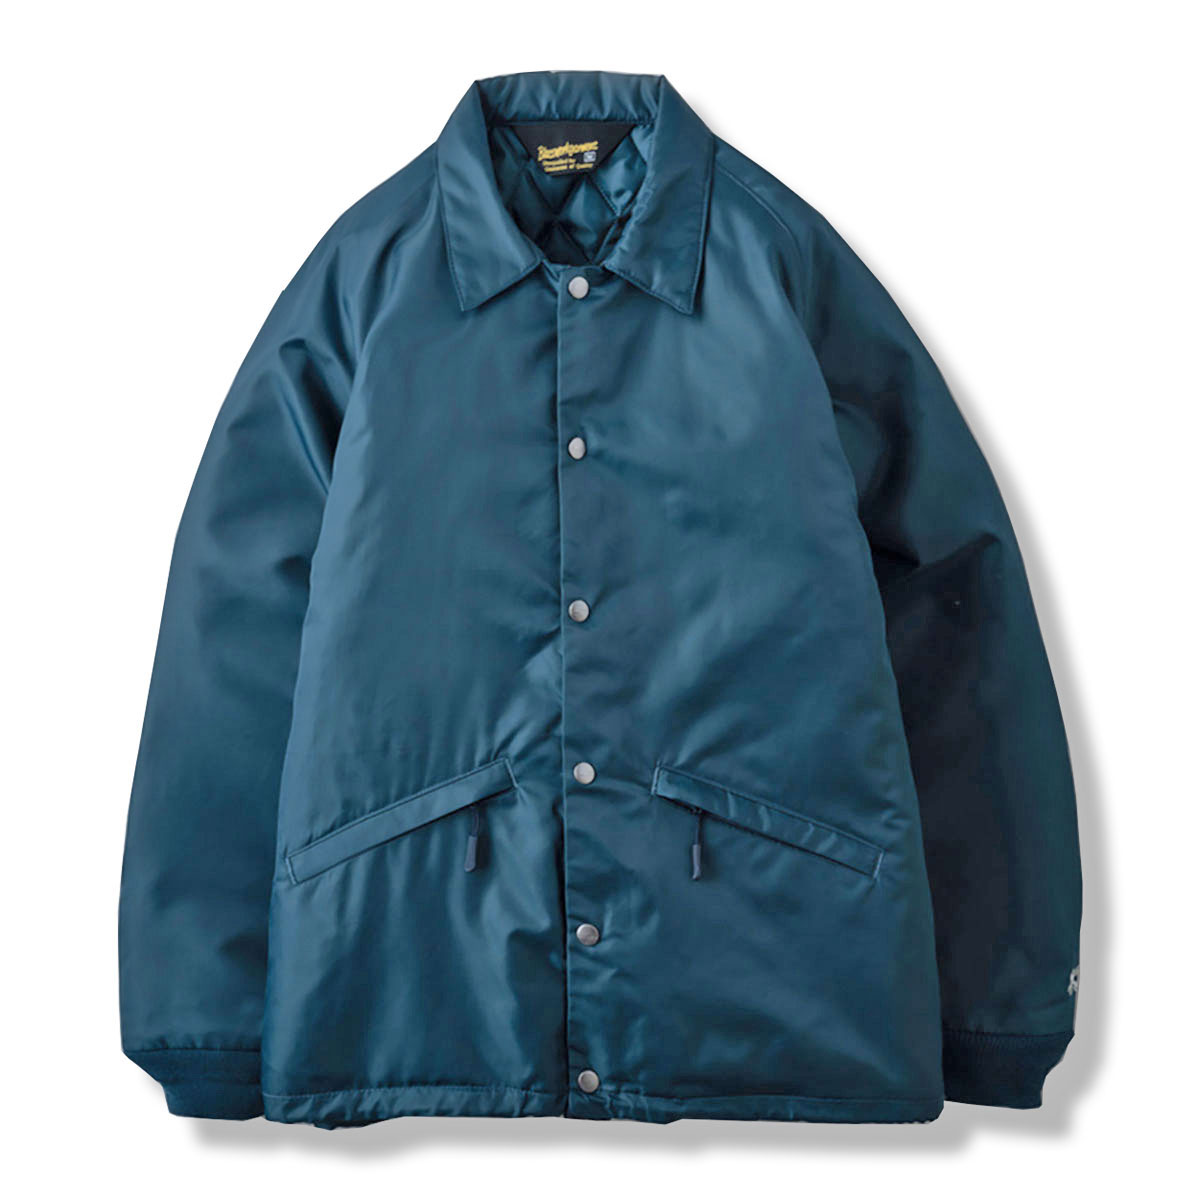 BLUCO(ブルコ) OL-051-022 QUILTING COACH JACKET 4色(BLK/BRG/NVY/OLV)☆送料無料☆｜pinsstore｜04